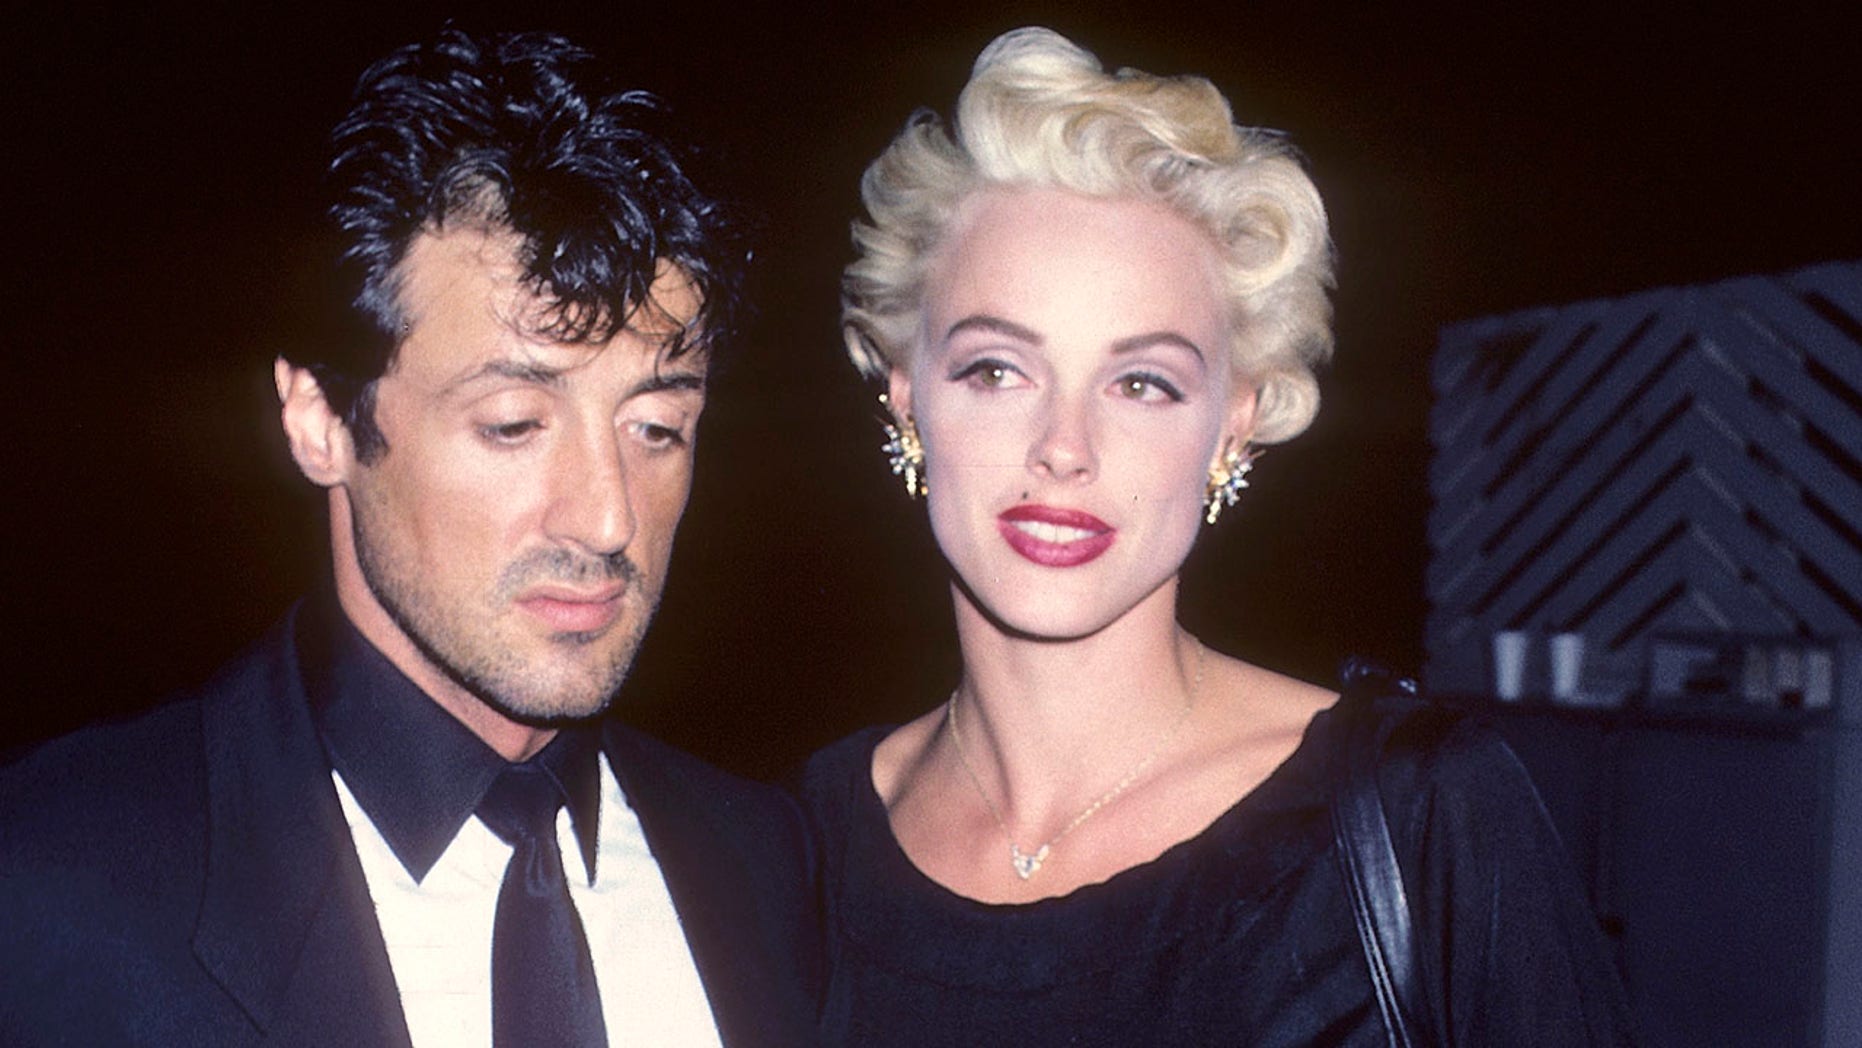 Brigitte Nielsen and Sylvester Stallone's 'Creed II' reunion was